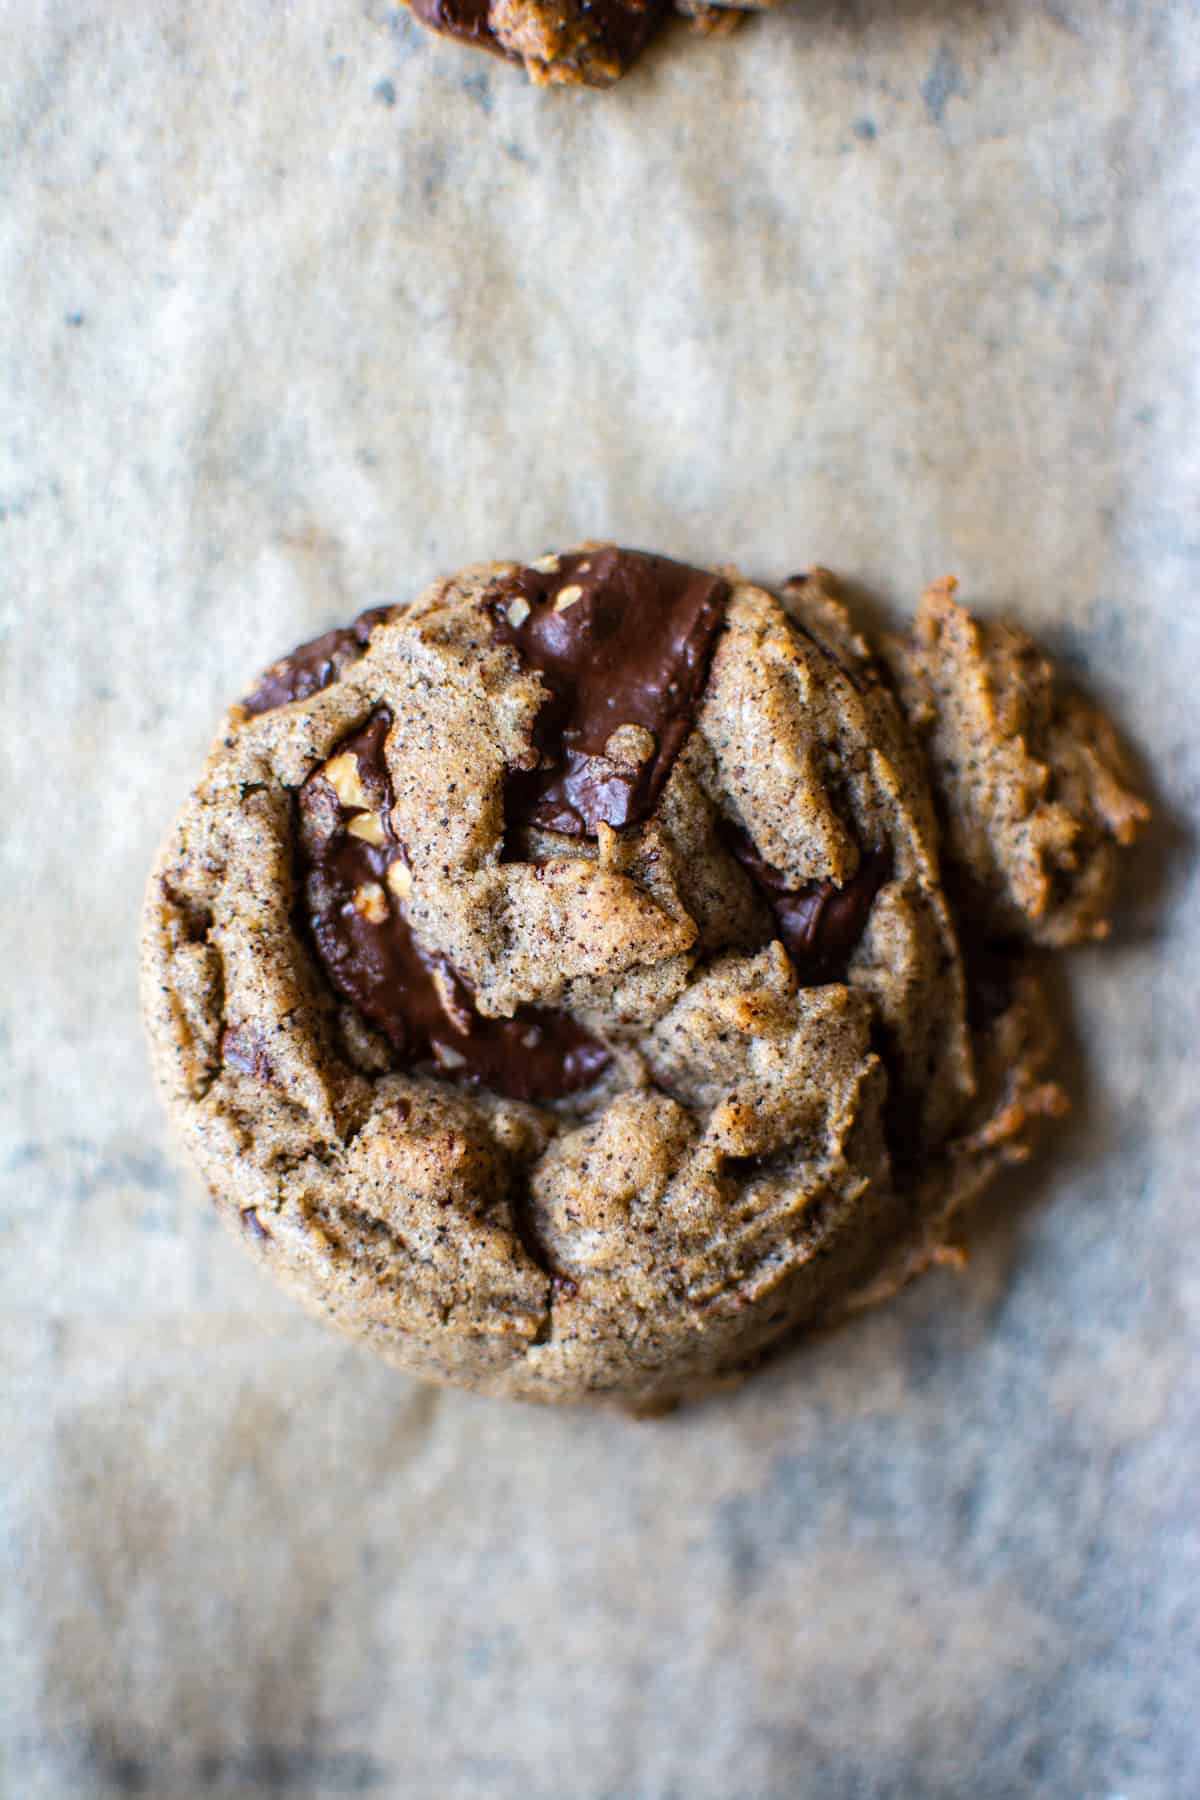 A coffee bean chocolate chip cookie sitting on a parchment lined baking sheet.